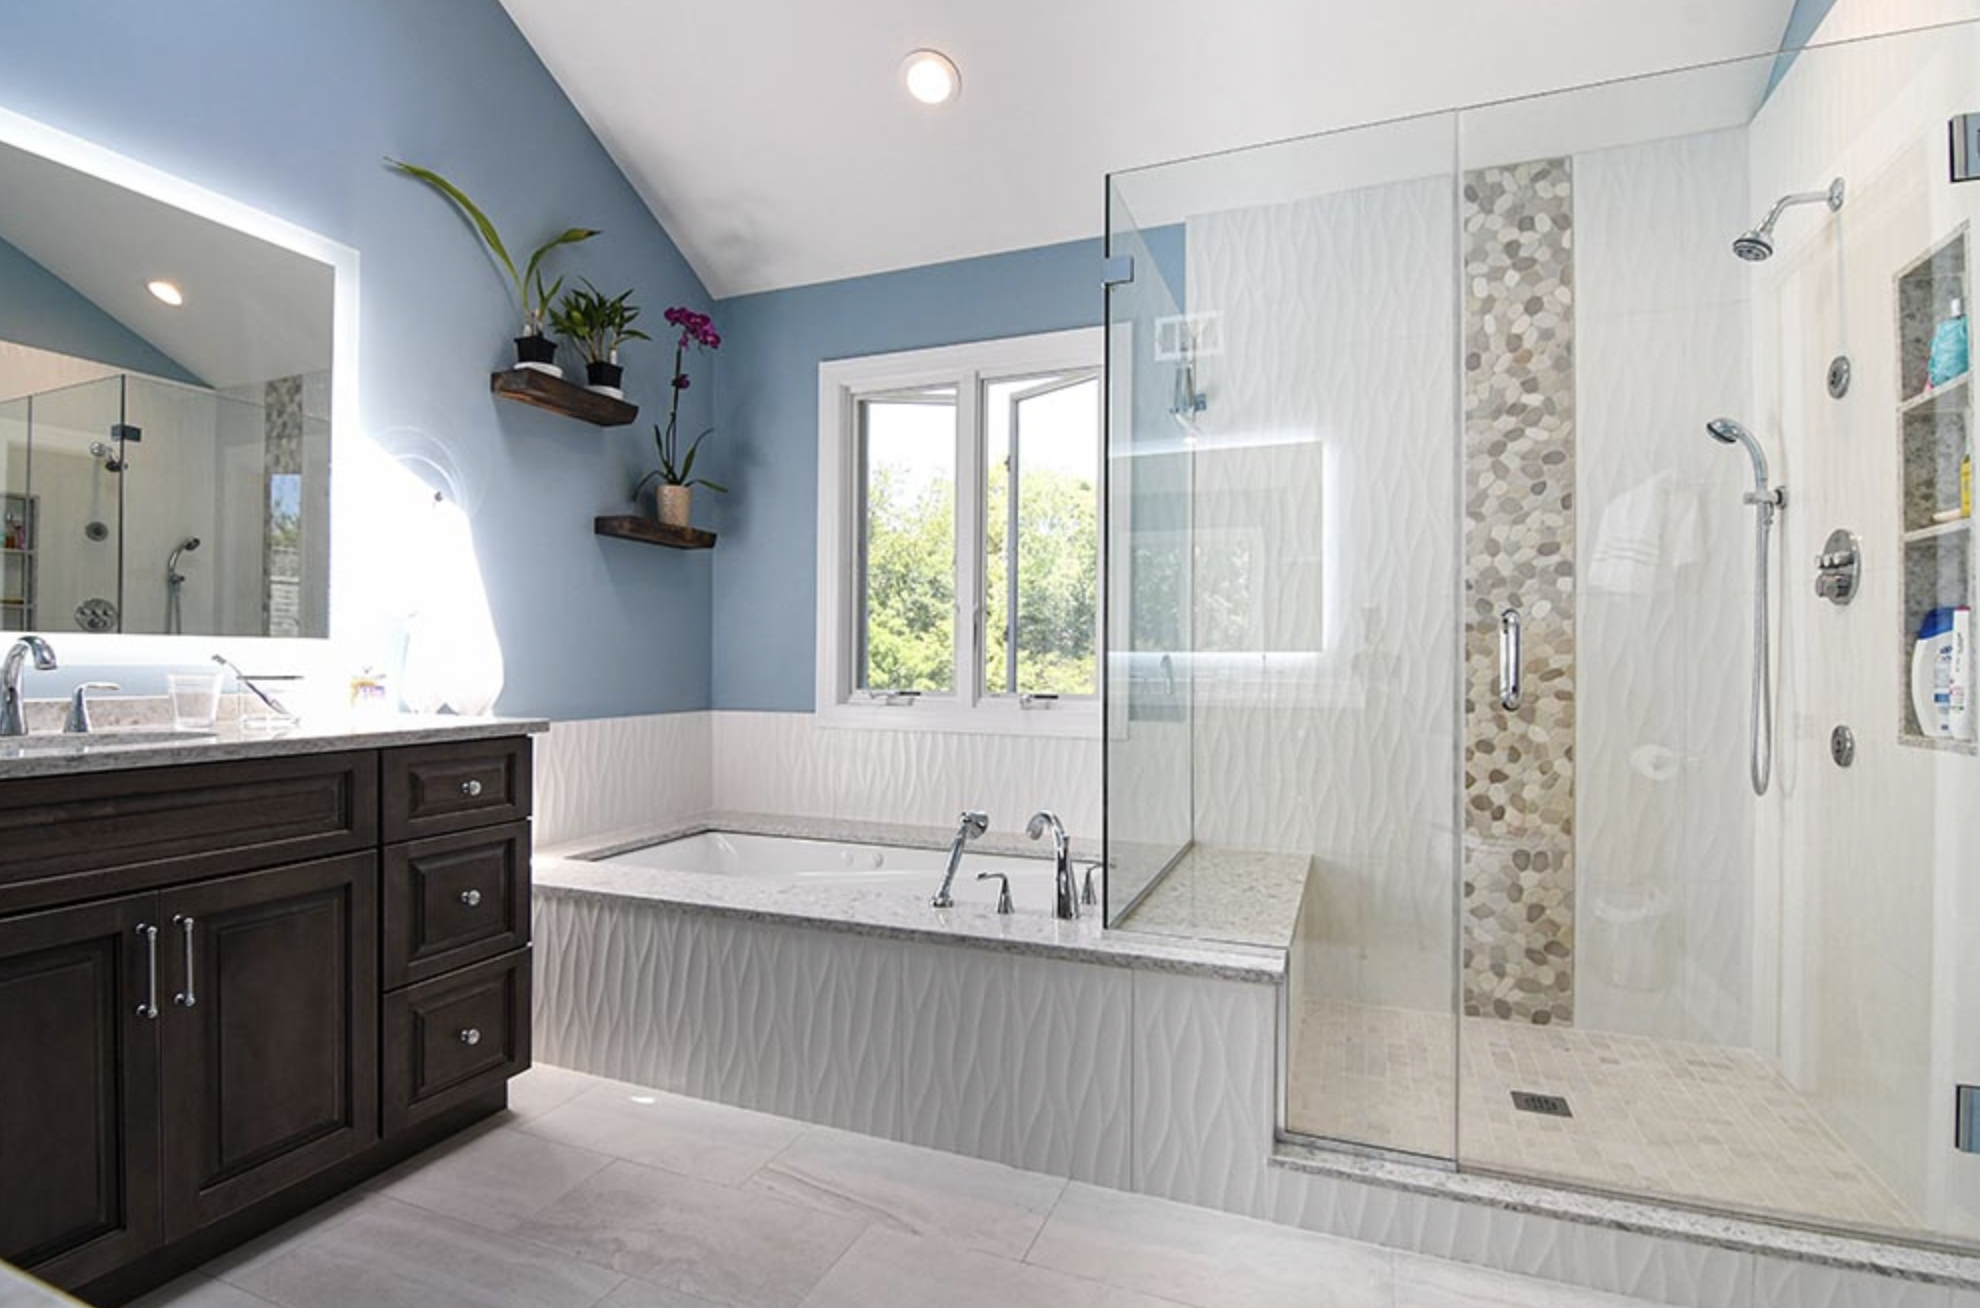 How to Improve Function in Your Bathroom With a Remodel